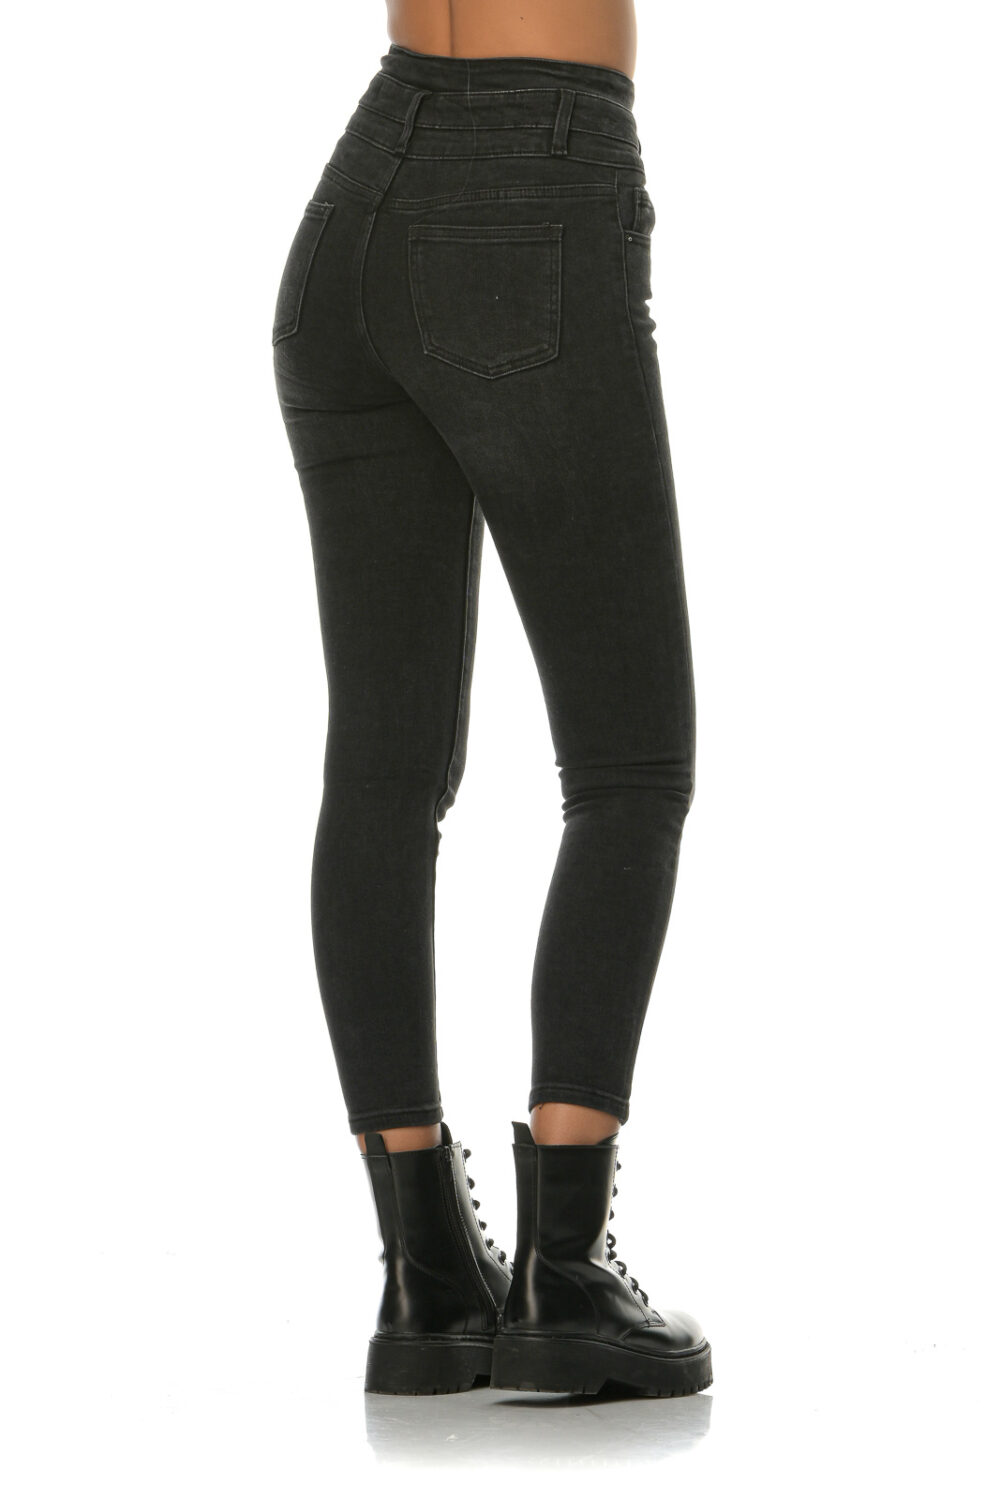 Black high-waisted jeans with buttons